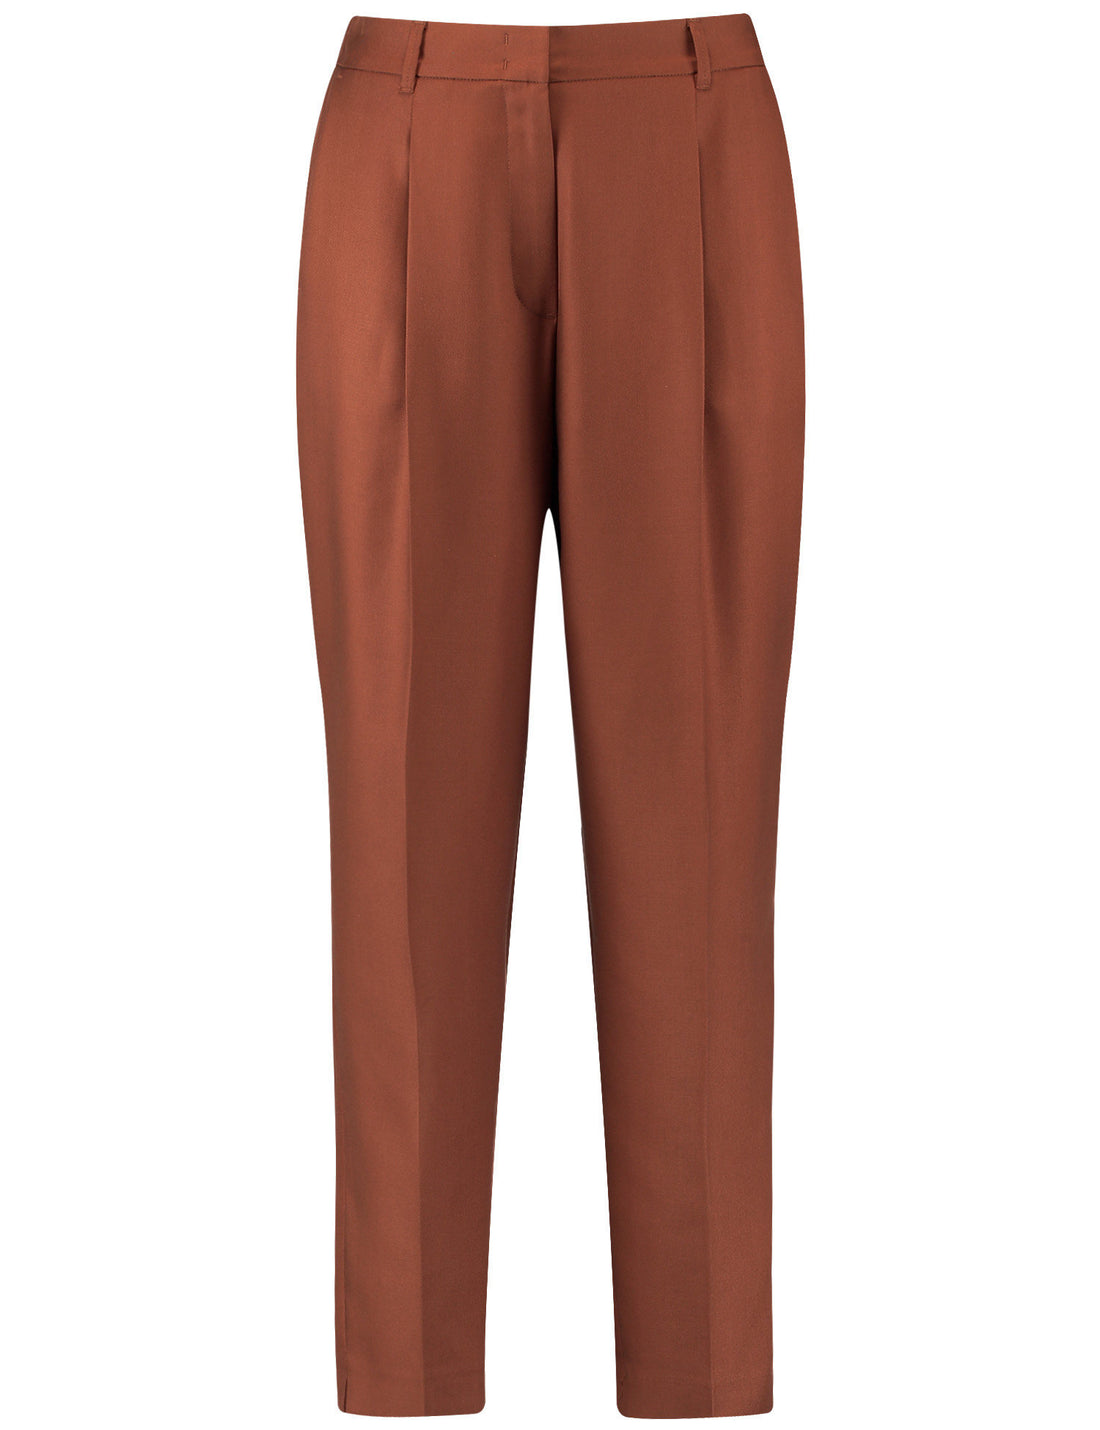 7/8 Length Trousers With An Elasticated Waistband On The Back_220006-31211_60703_02